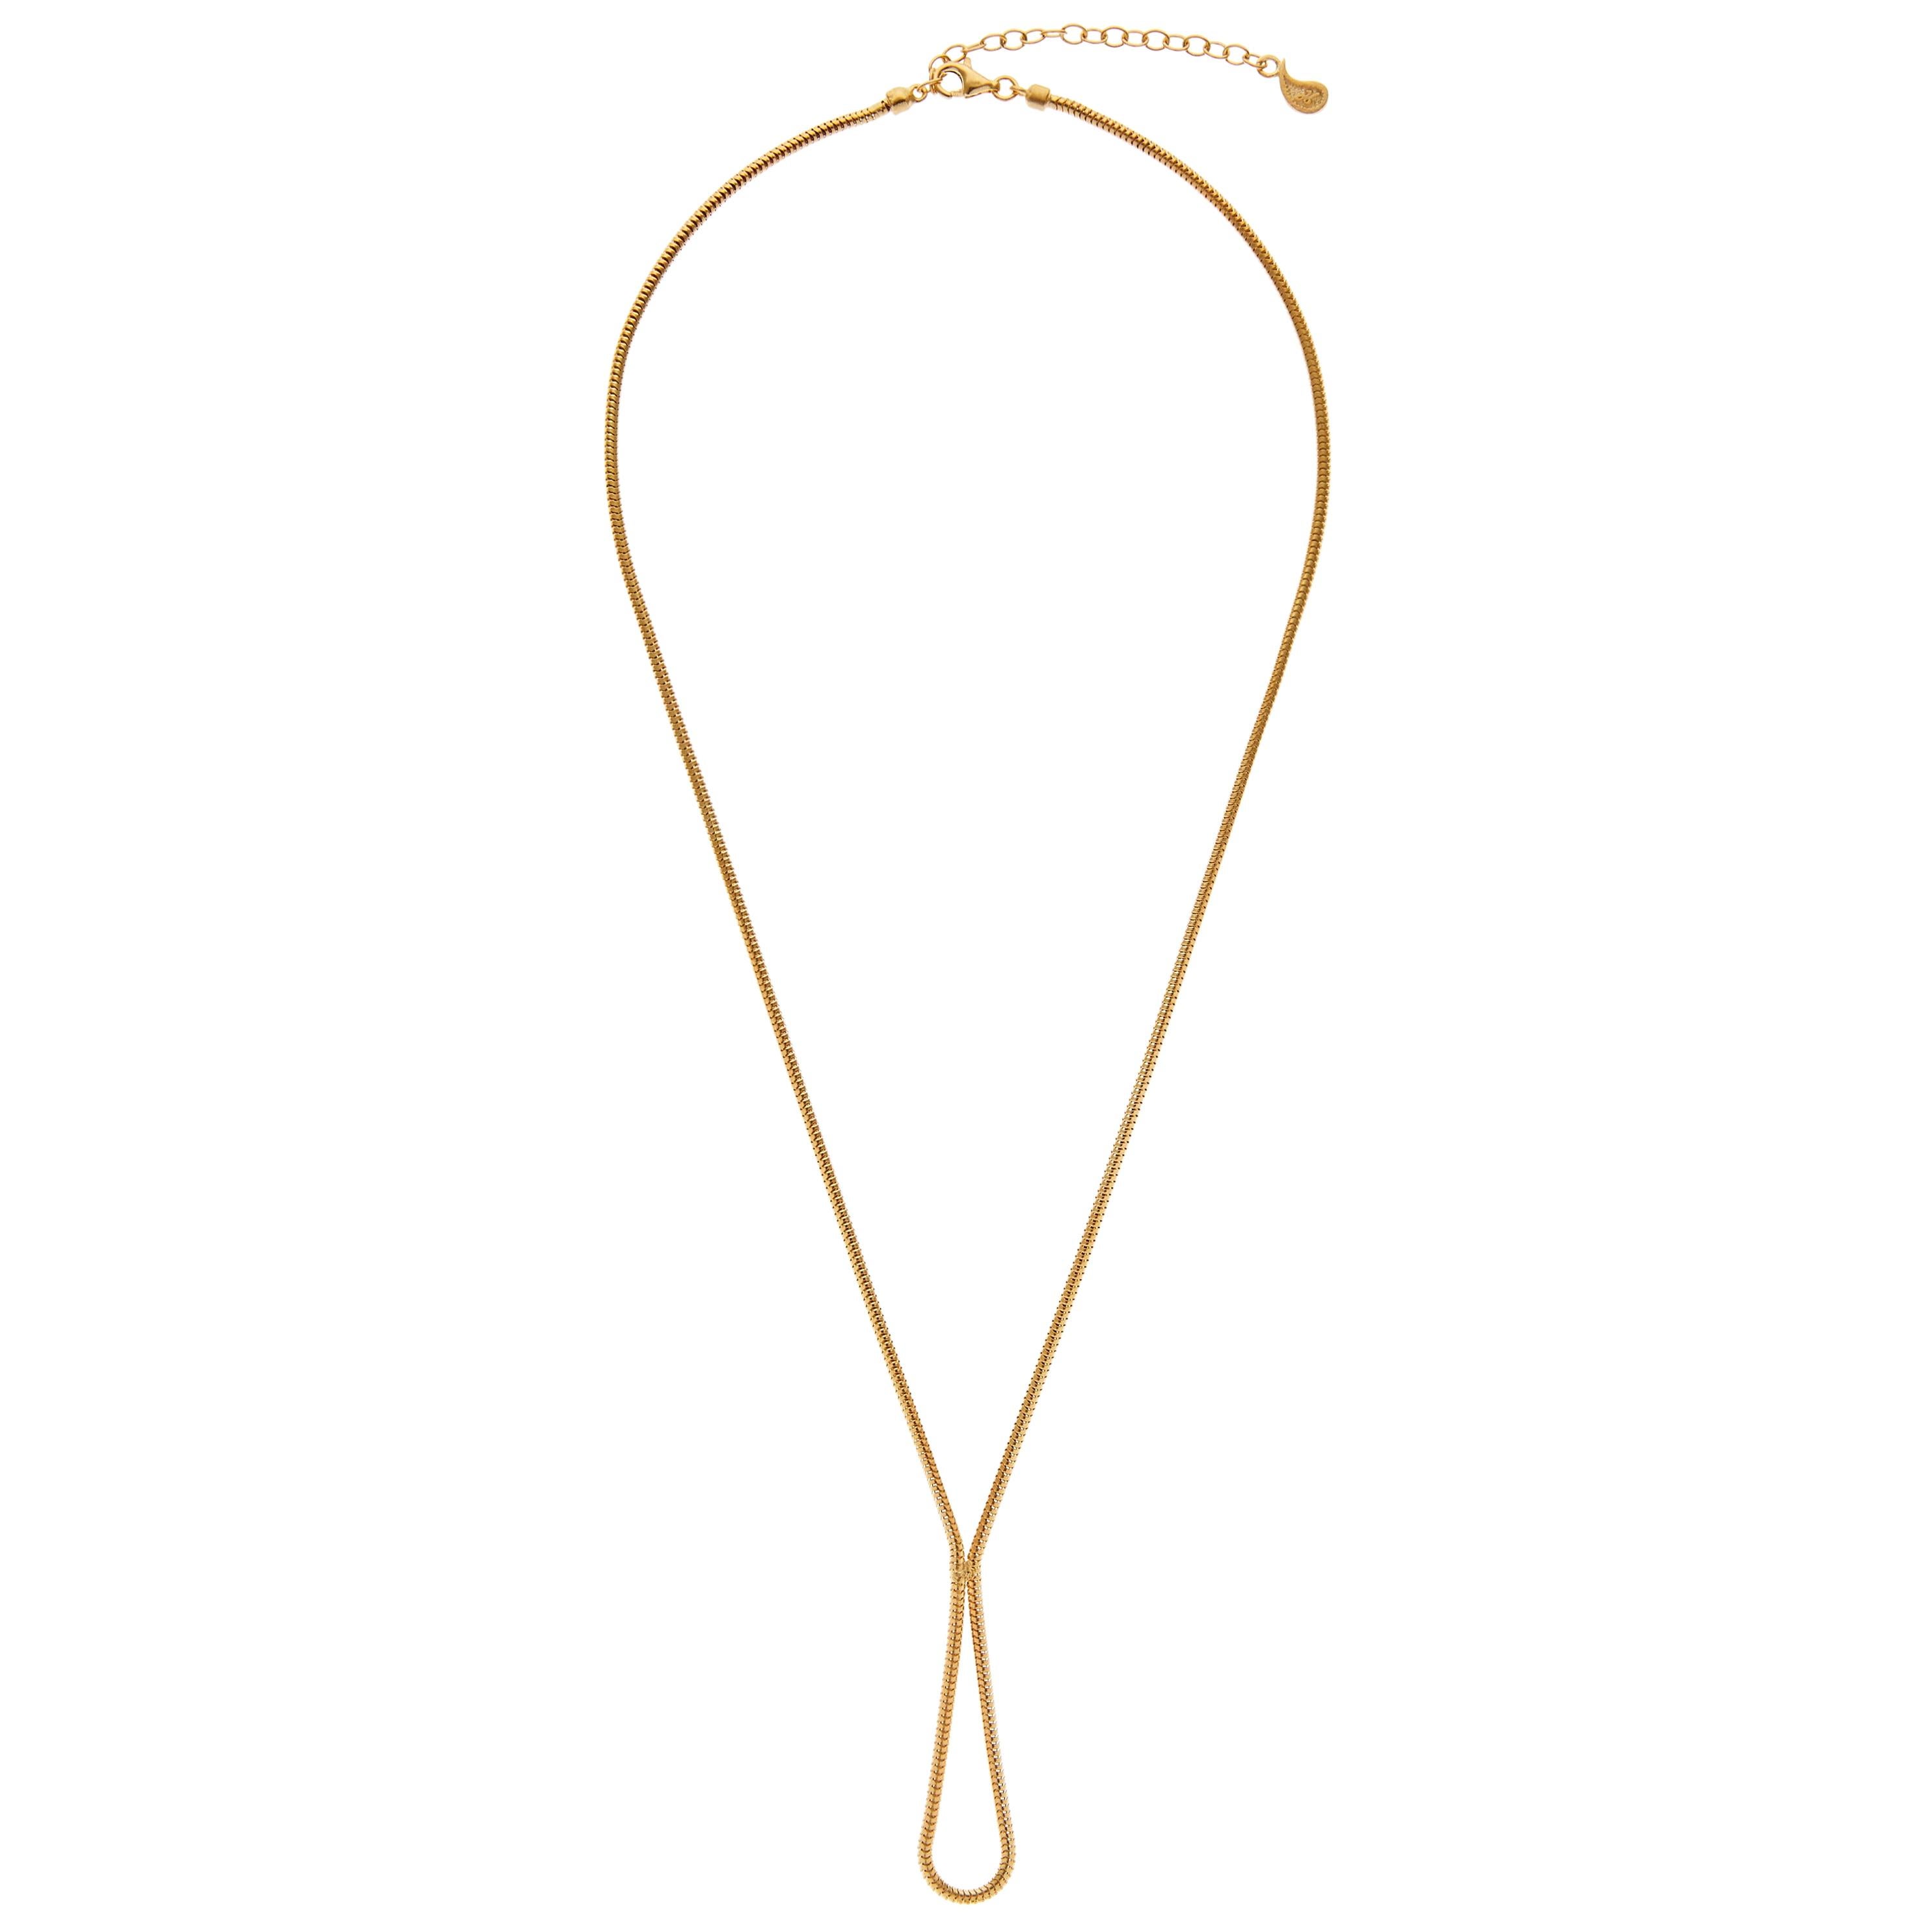 Silver 18K Gold-Plated Necklace Melodia Minimal Short Snake Chain Greek Jewelry